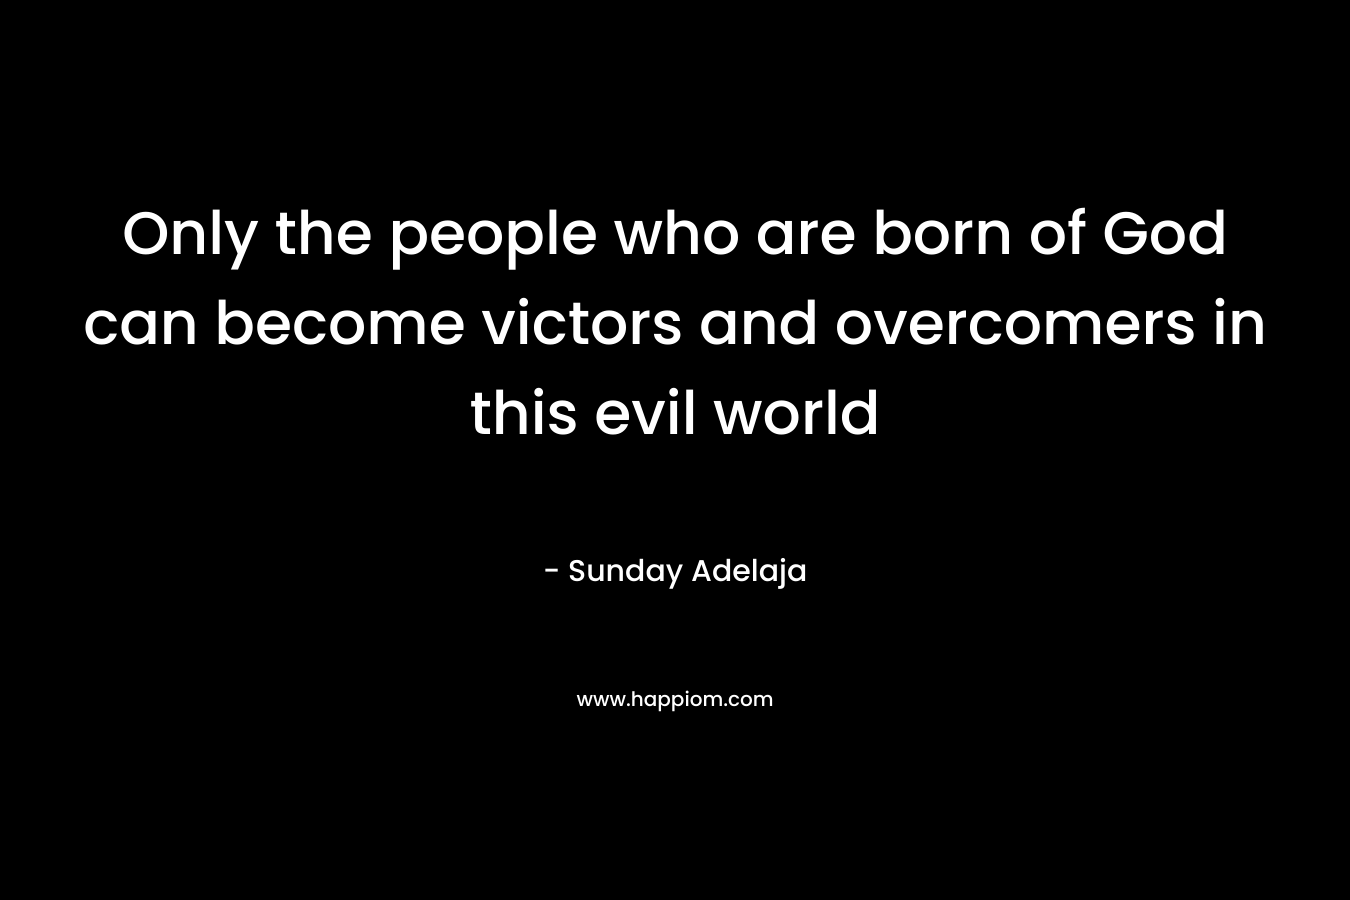 Only the people who are born of God can become victors and overcomers in this evil world – Sunday Adelaja